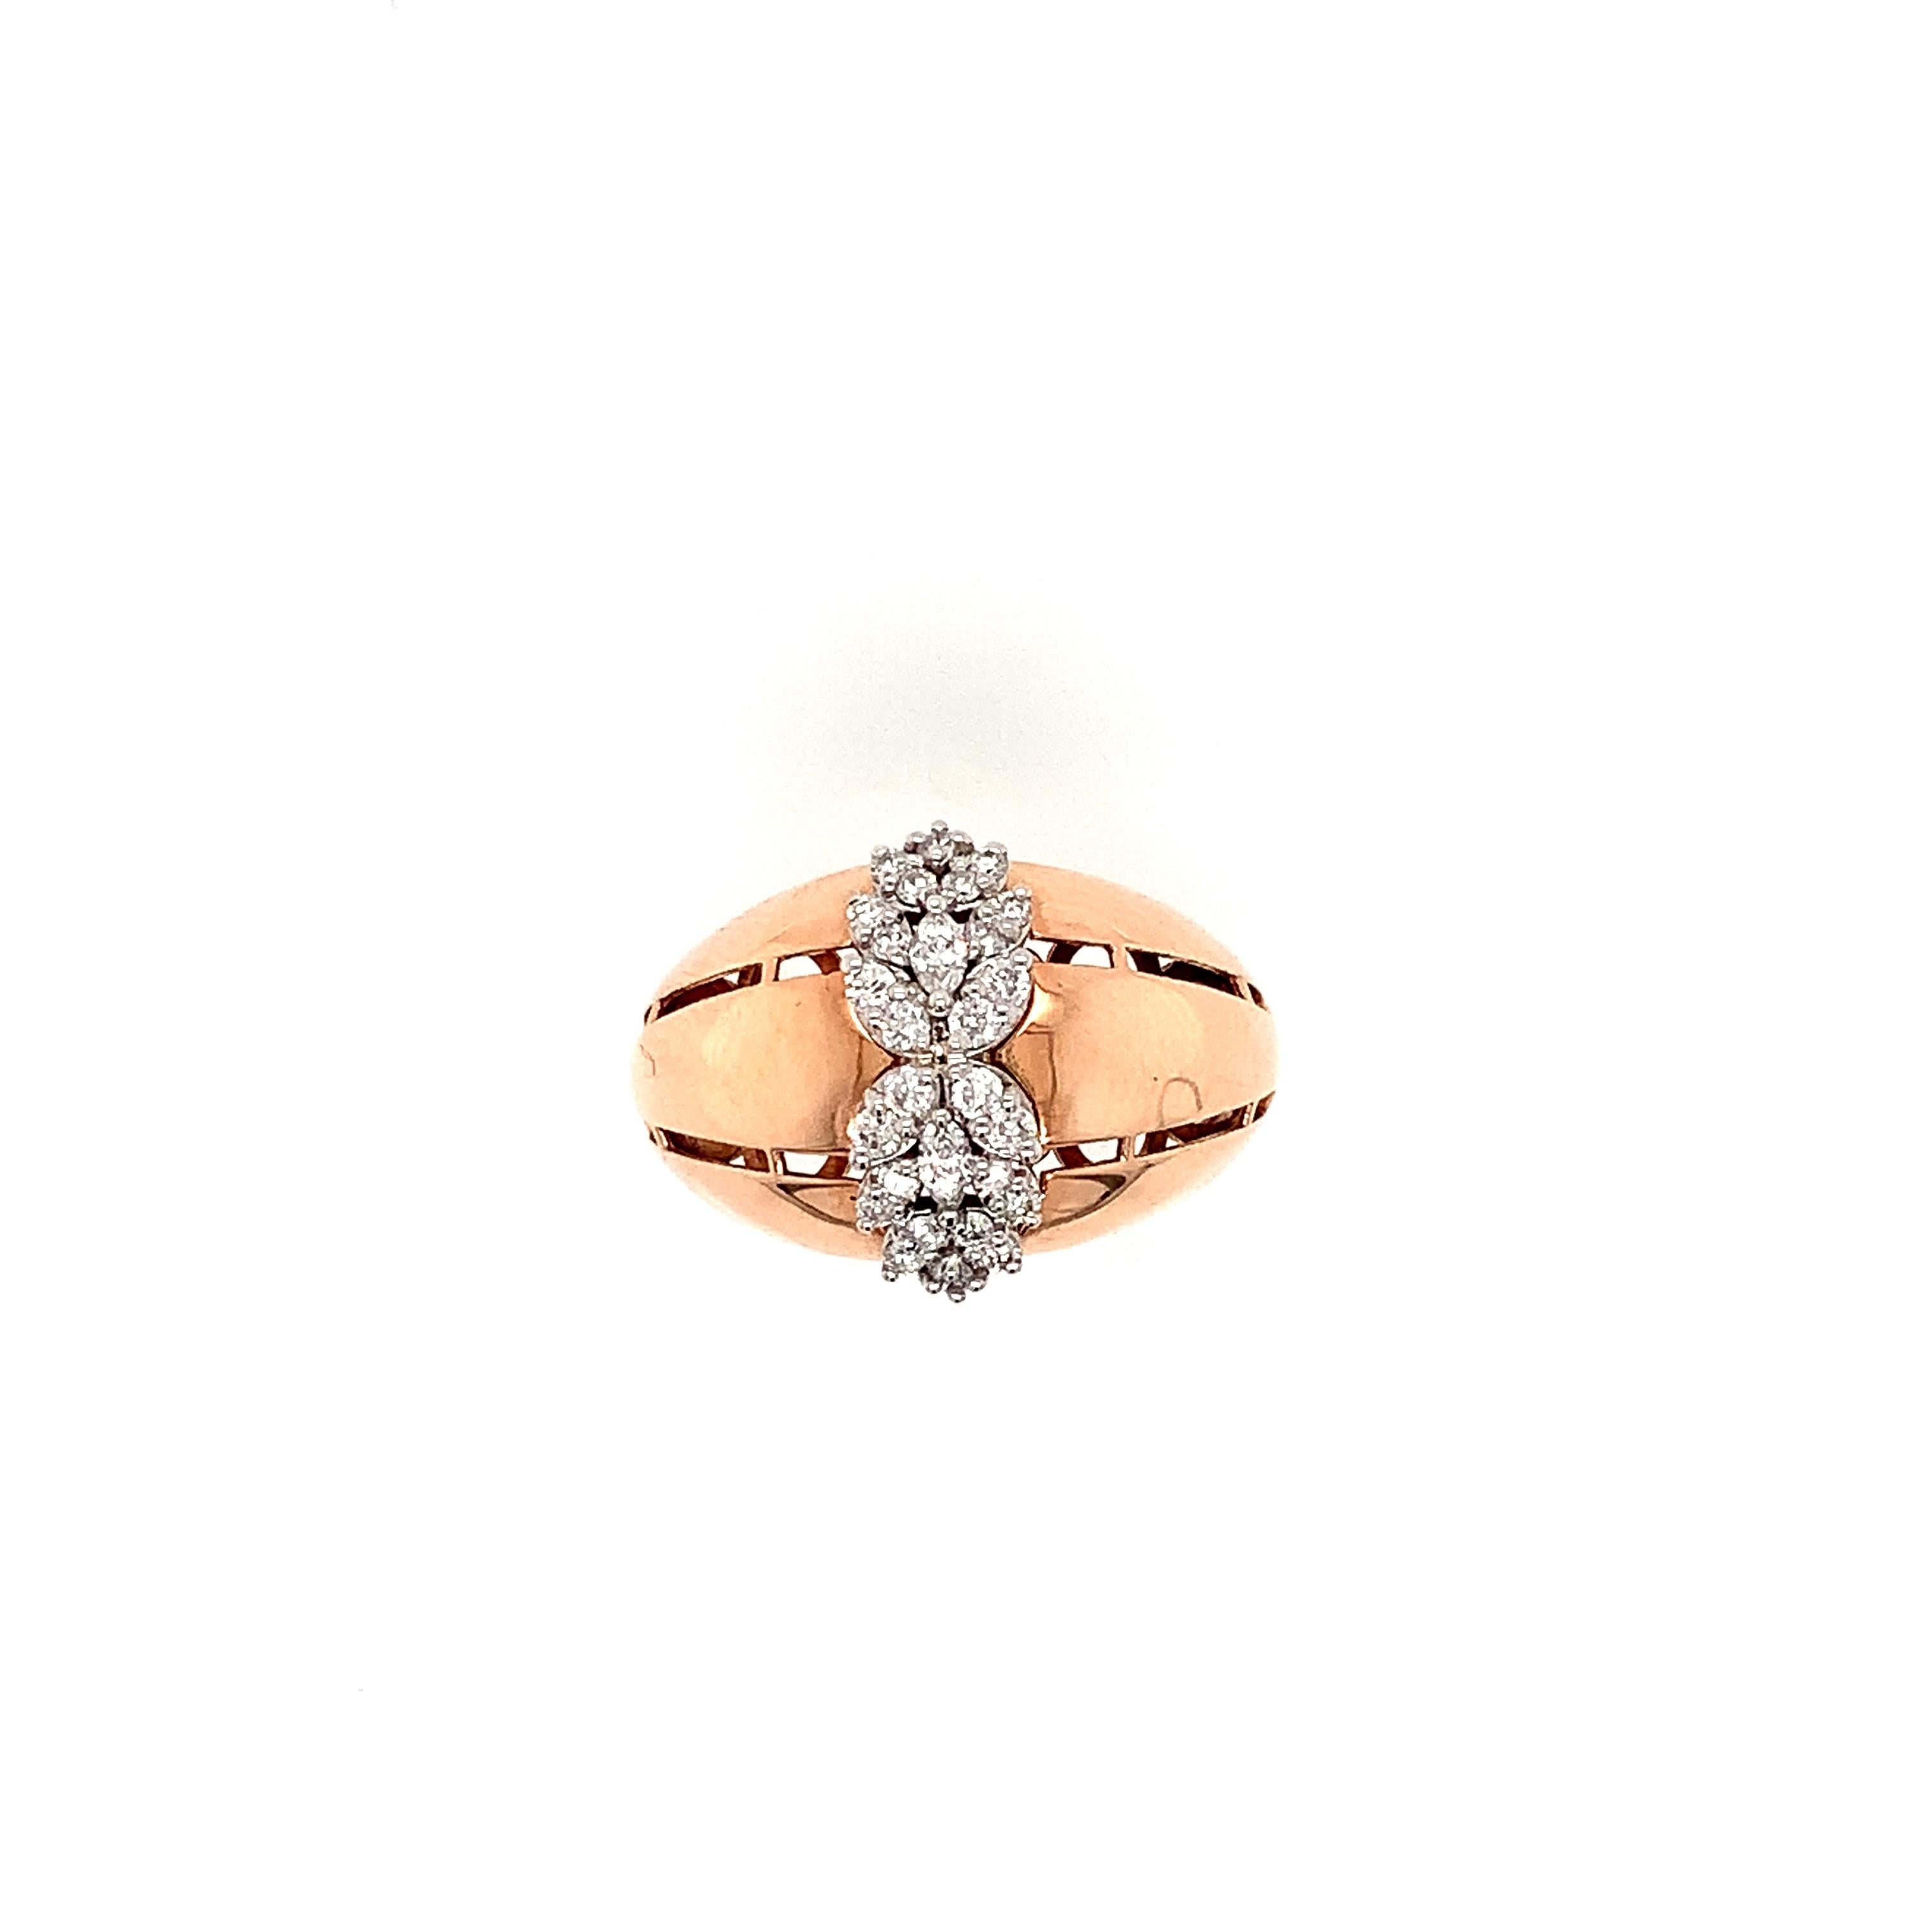 OWN Your Story 18K Rose Gold Marquise Diamond Symmetric Flower Ring

OWN Your Story brings its 3 generations of family tradition and unparalleled experience with 18K gold, diamonds, and gemstones to create high-level jewelry handcrafted in Istanbul